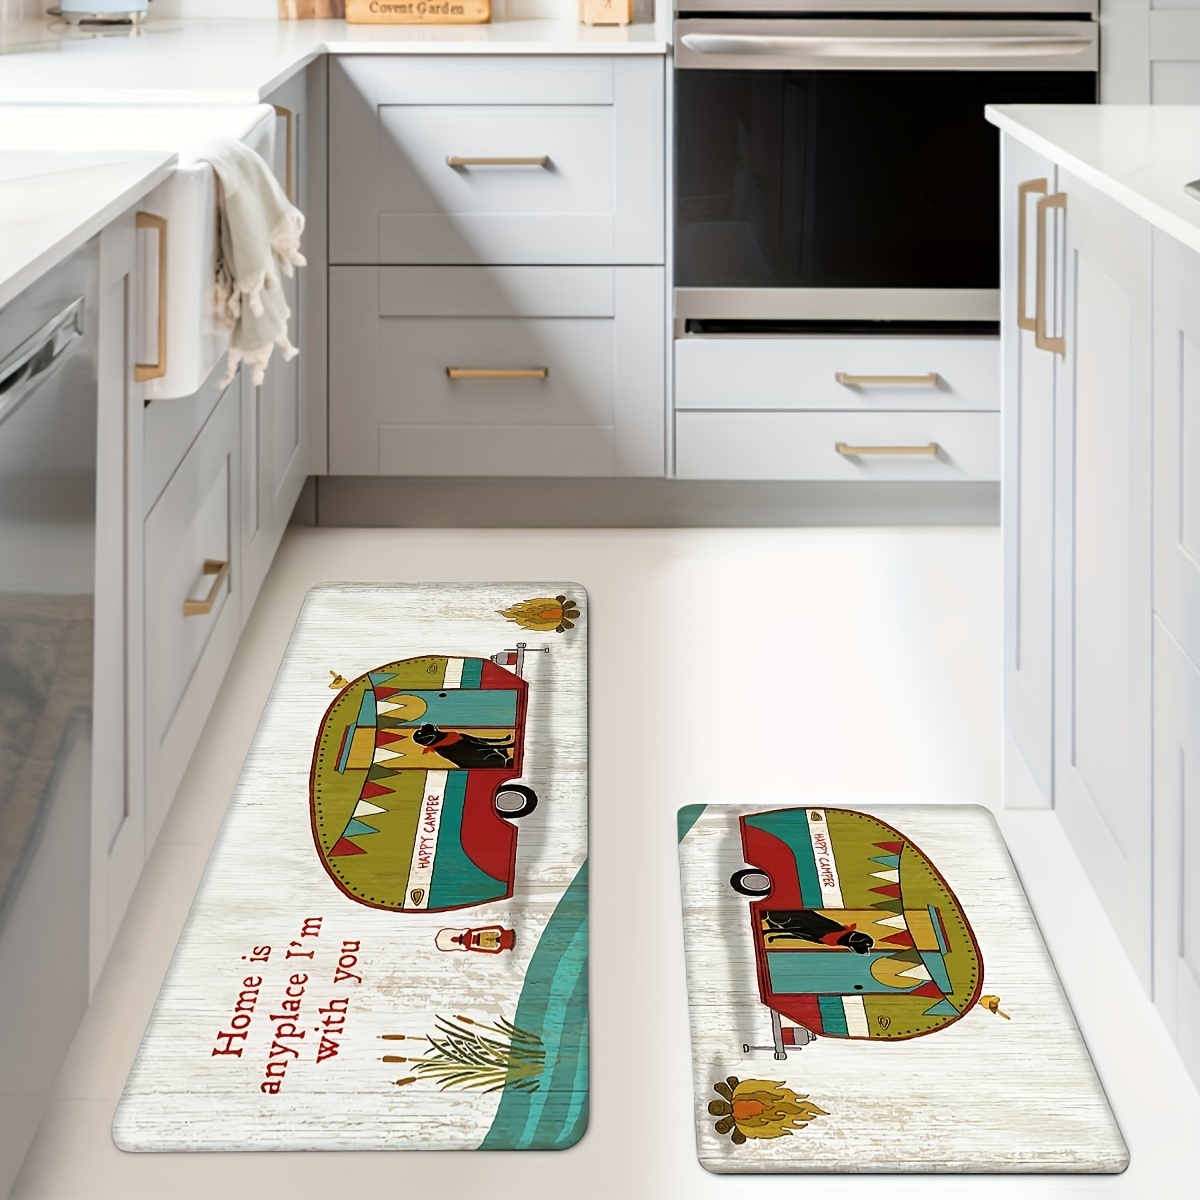 

Vintage Camper Kitchen Rugs Set, 3 Pieces, Non-slip, Absorbent, Machine Washable Polyester, Decorative Runner Mats For Home - 40x60cm, 50x80cm, 40x120cm